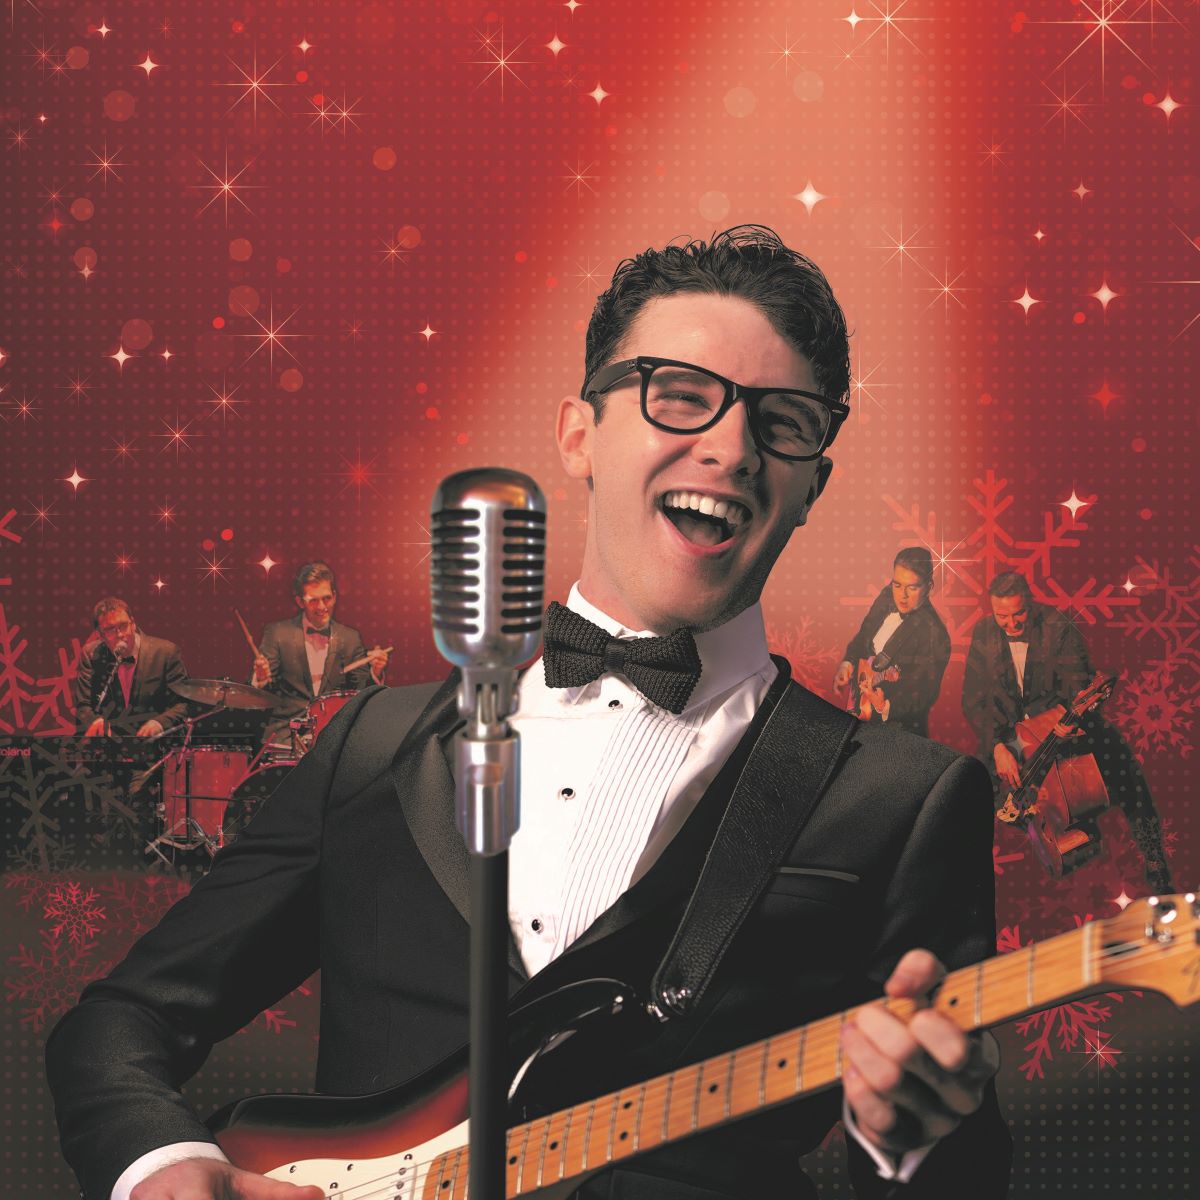 Preview: Buddy Holly and the Cricketers, MAST Mayflower Studios, Southampton